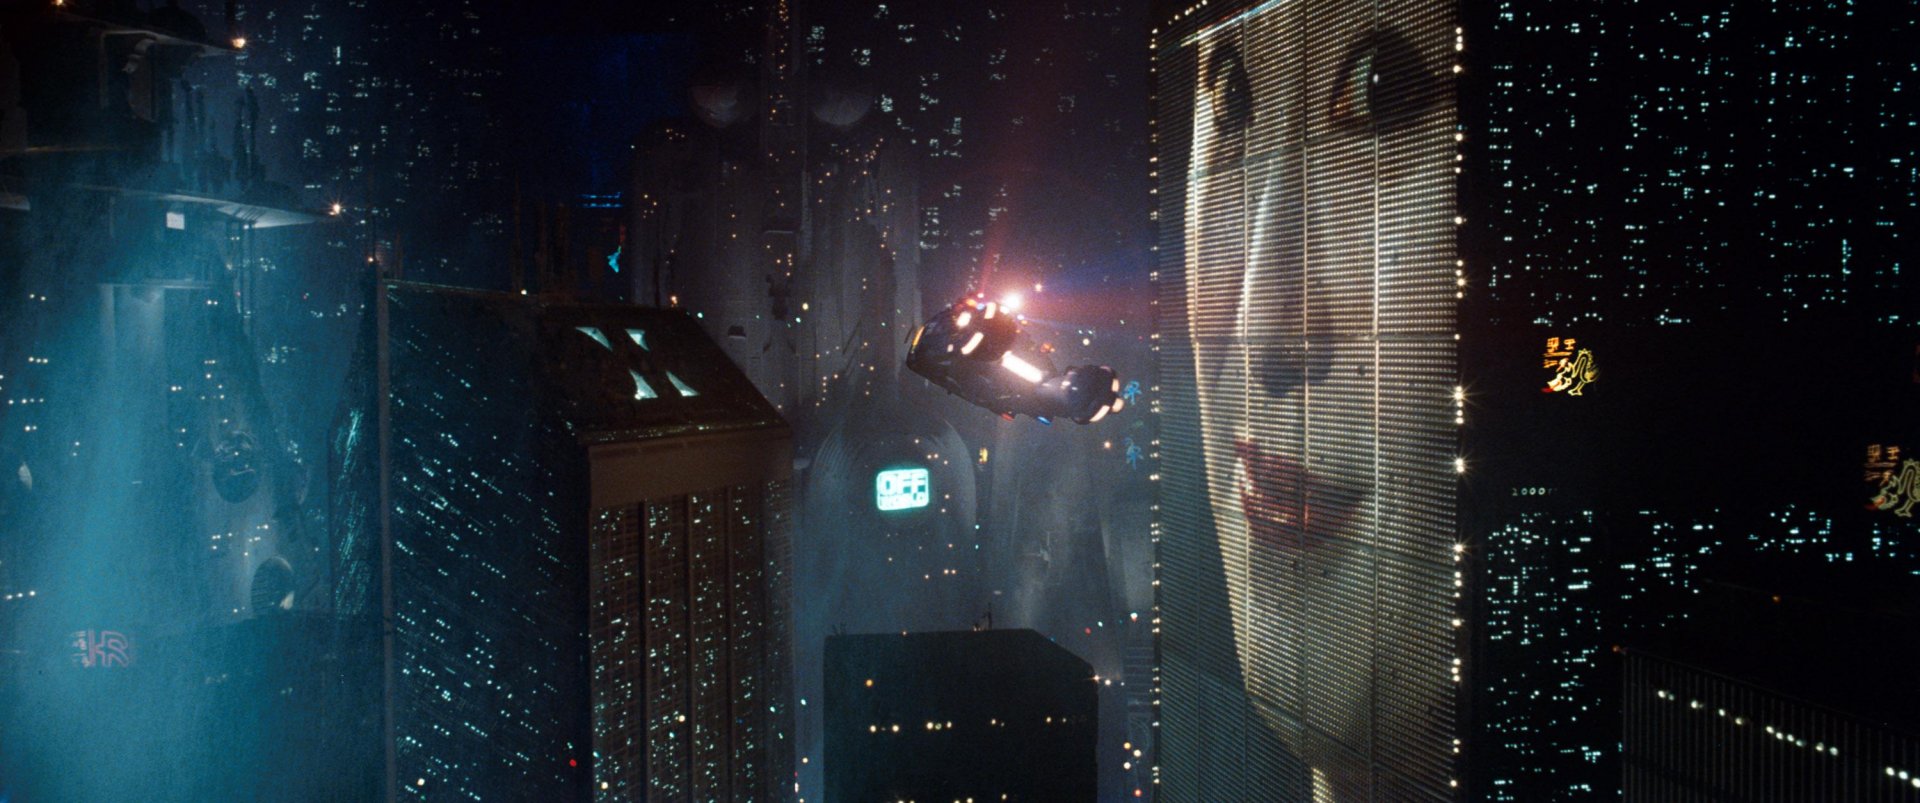 67 blade runner hd wallpapers background images wallpaper abyss 67 blade runner hd wallpapers